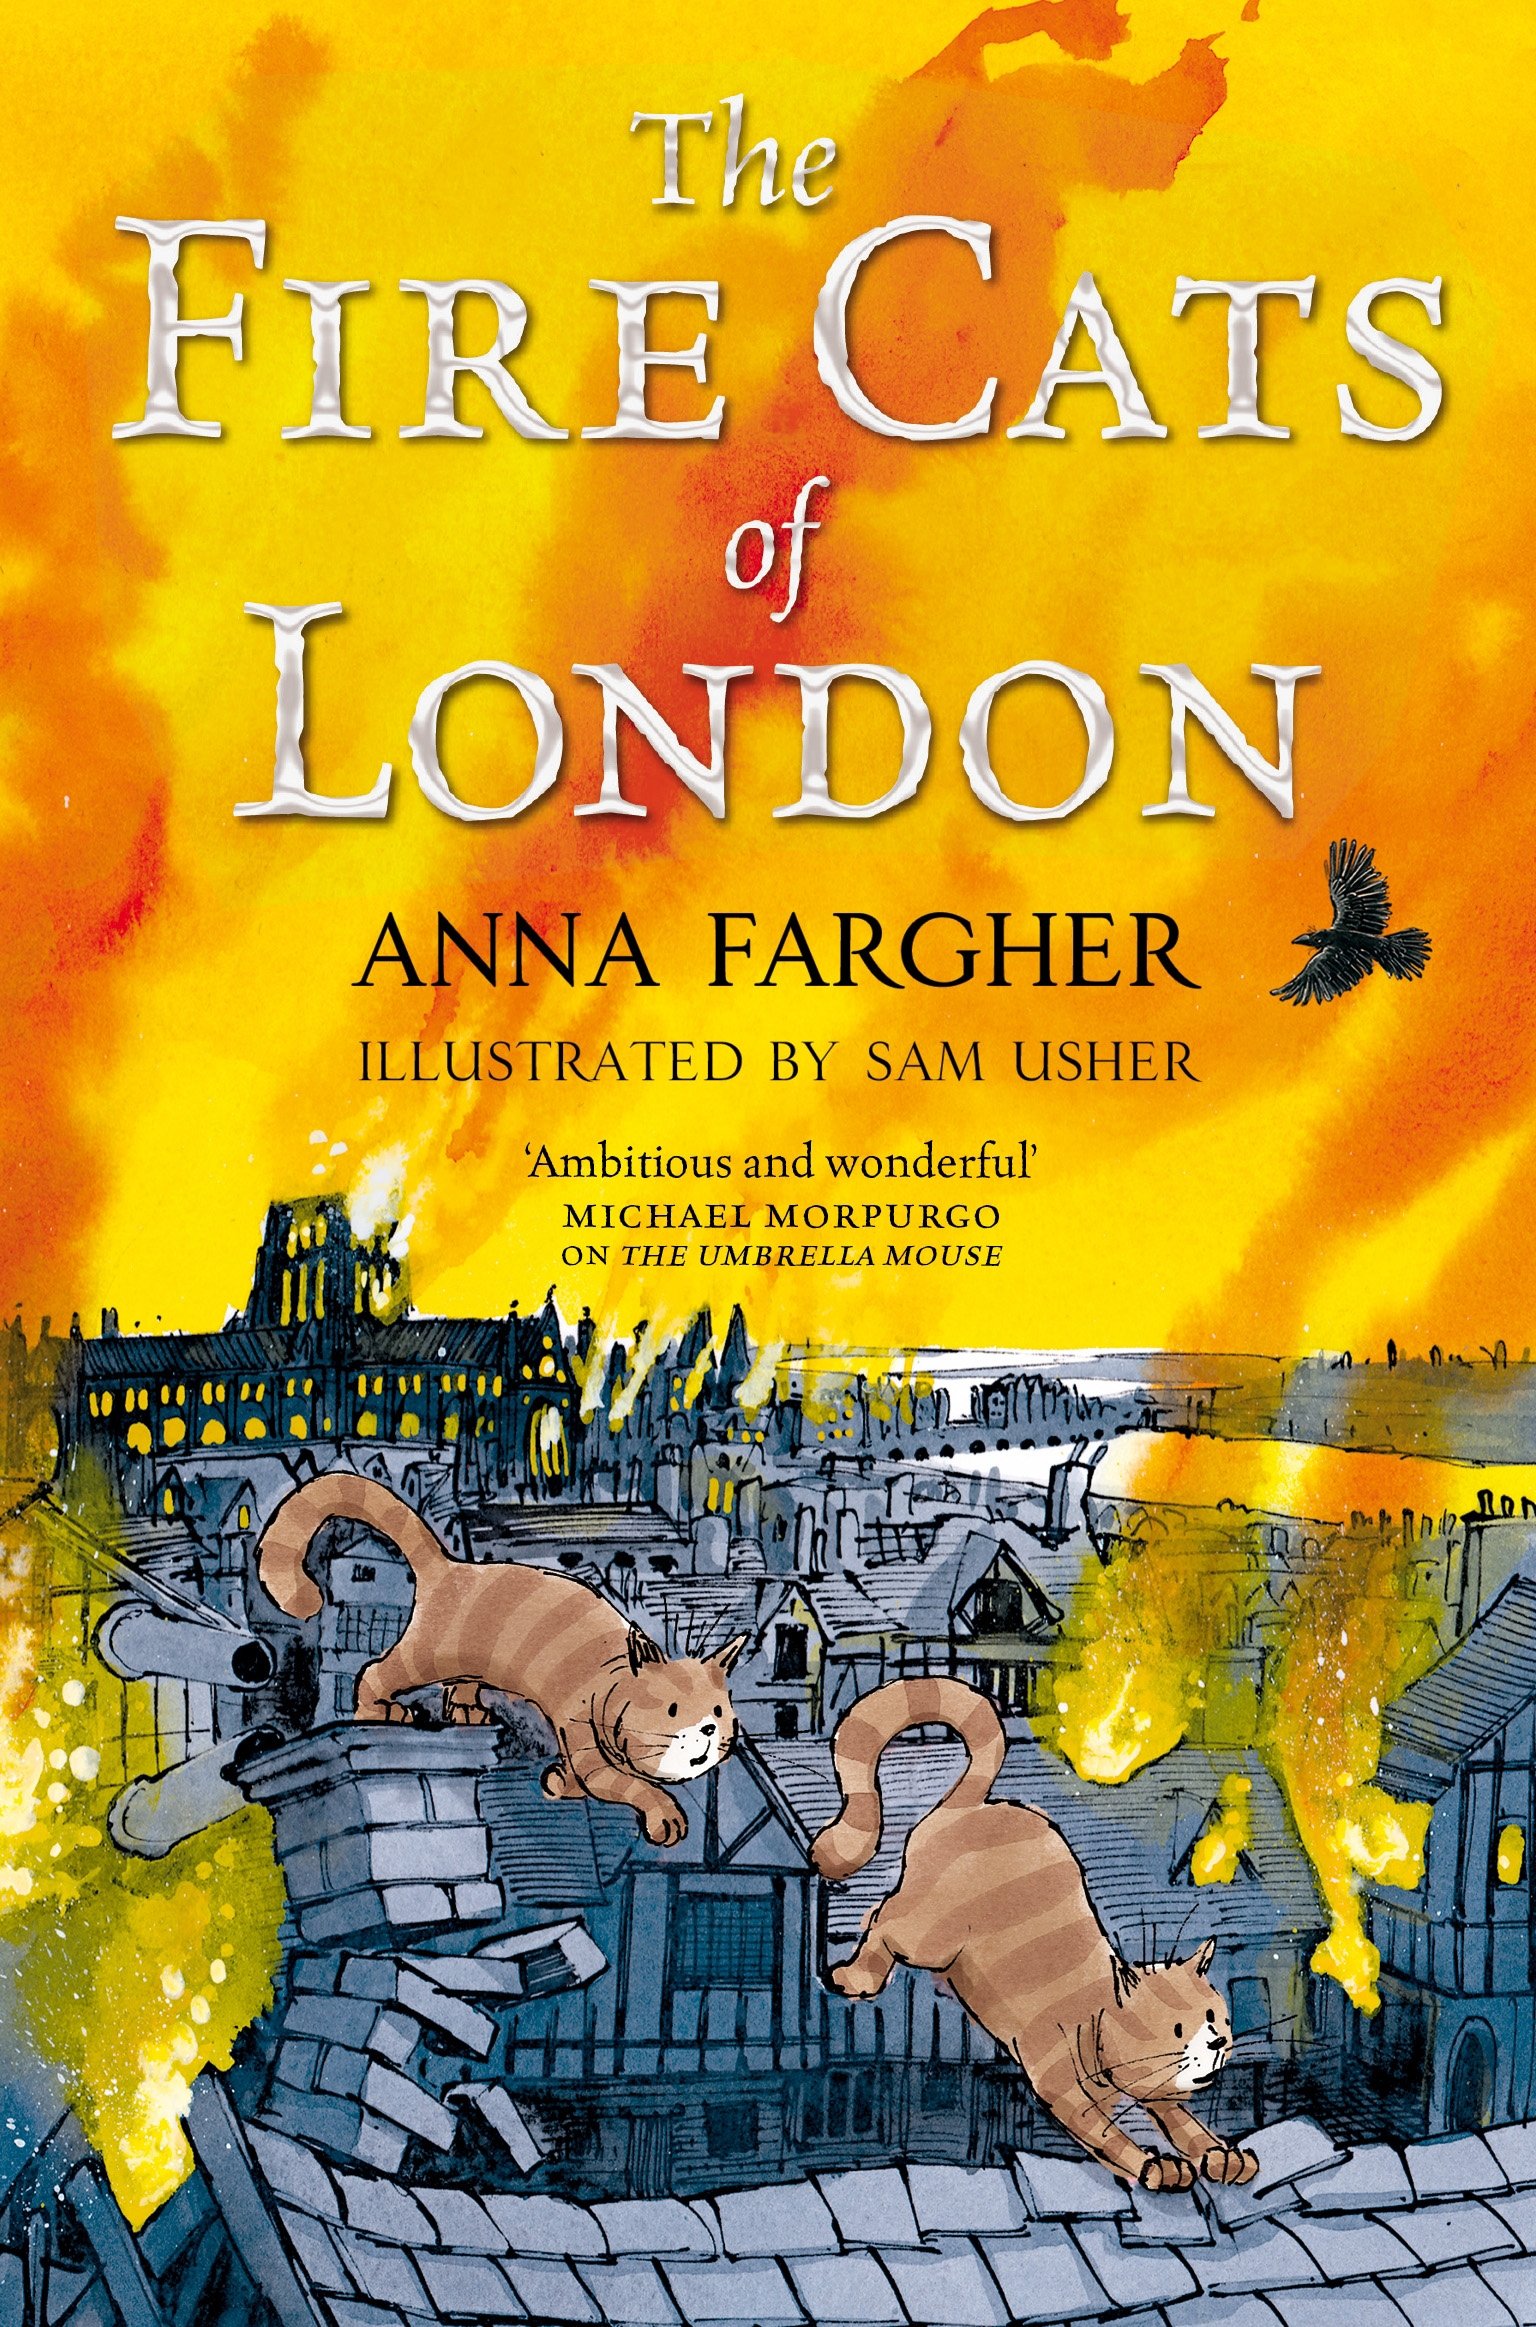 The Fire Cats of London book cover